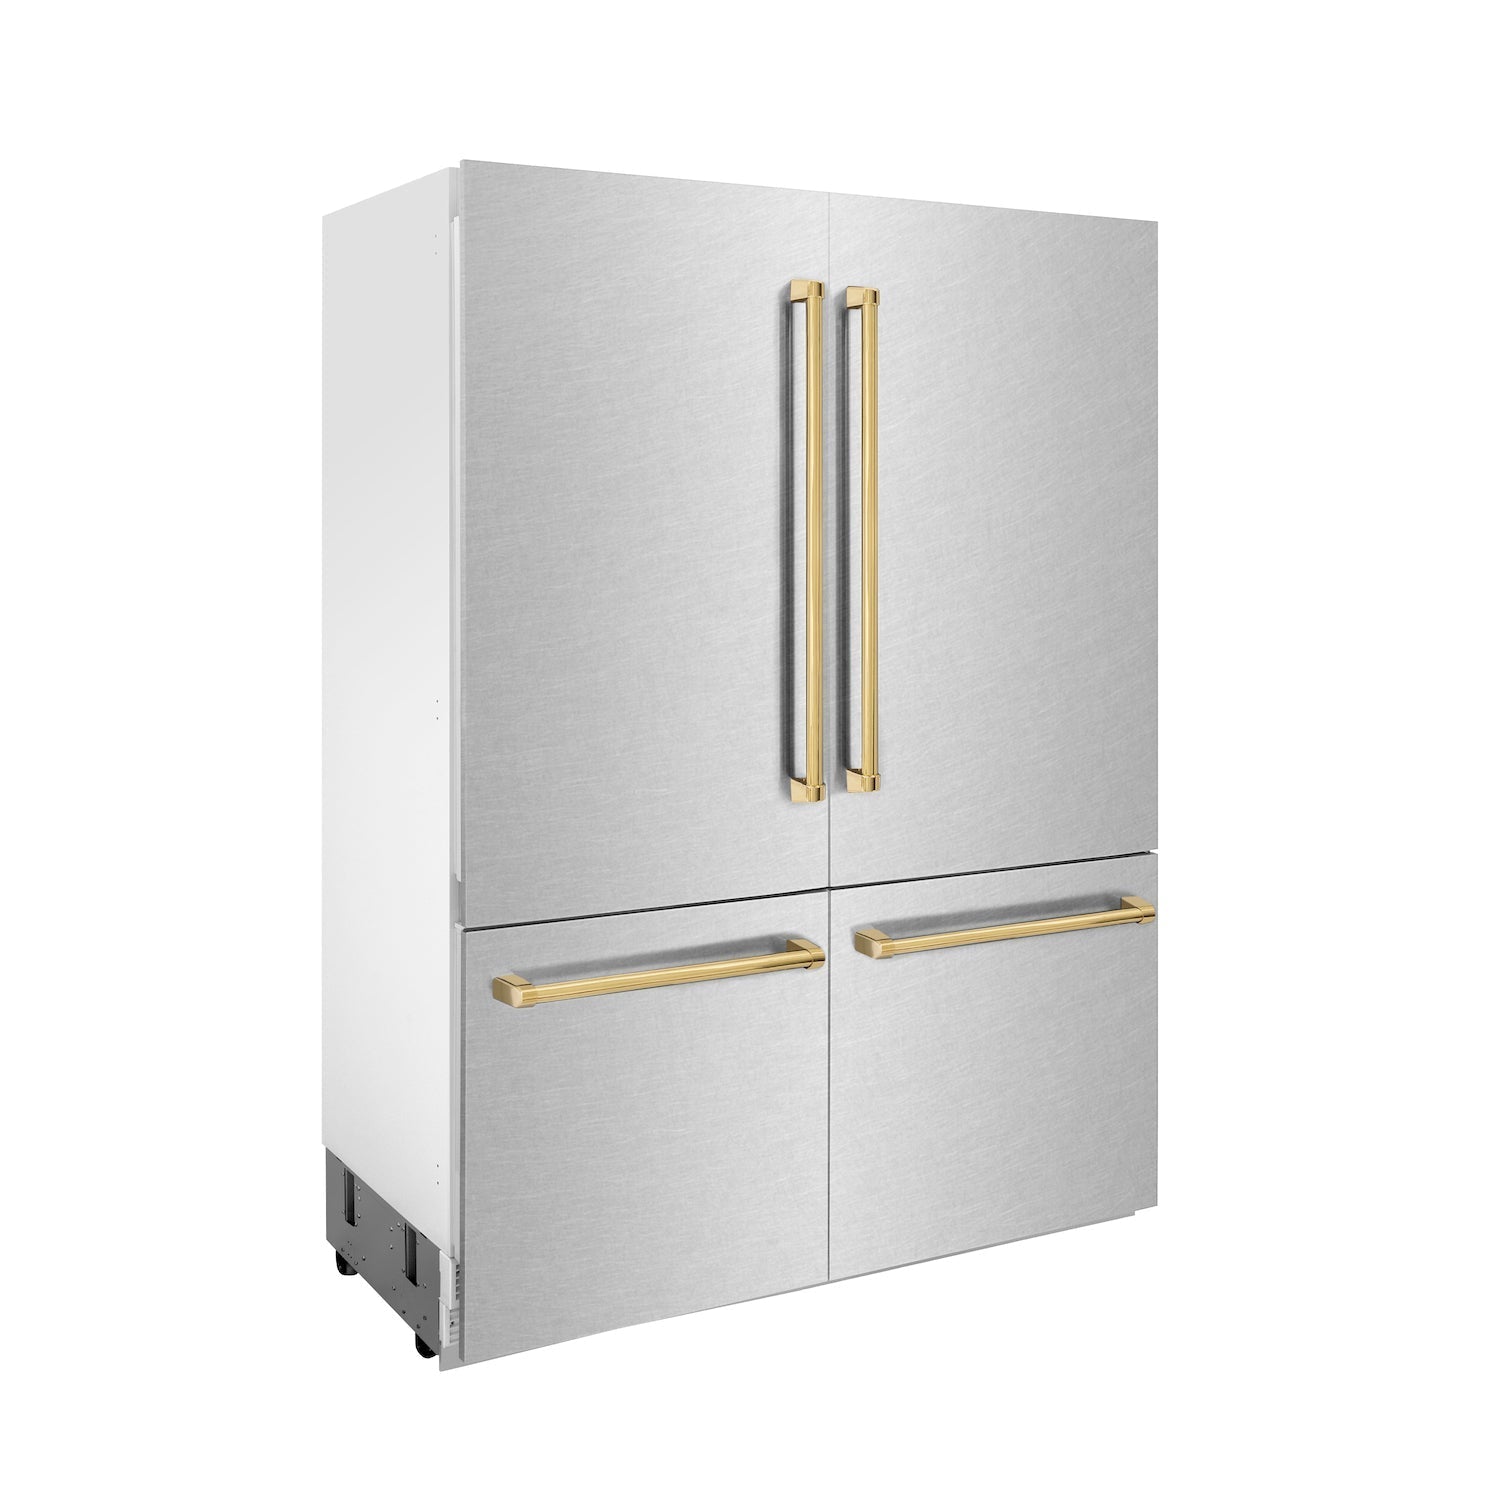 ZLINE 60" Autograph Edition 32.2 cu. ft. Built-in 4-Door French Door Refrigerator with Internal Water and Ice Dispenser in Fingerprint Resistant Stainless Steel with Gold Accents (RBIVZ-SN-60-G)